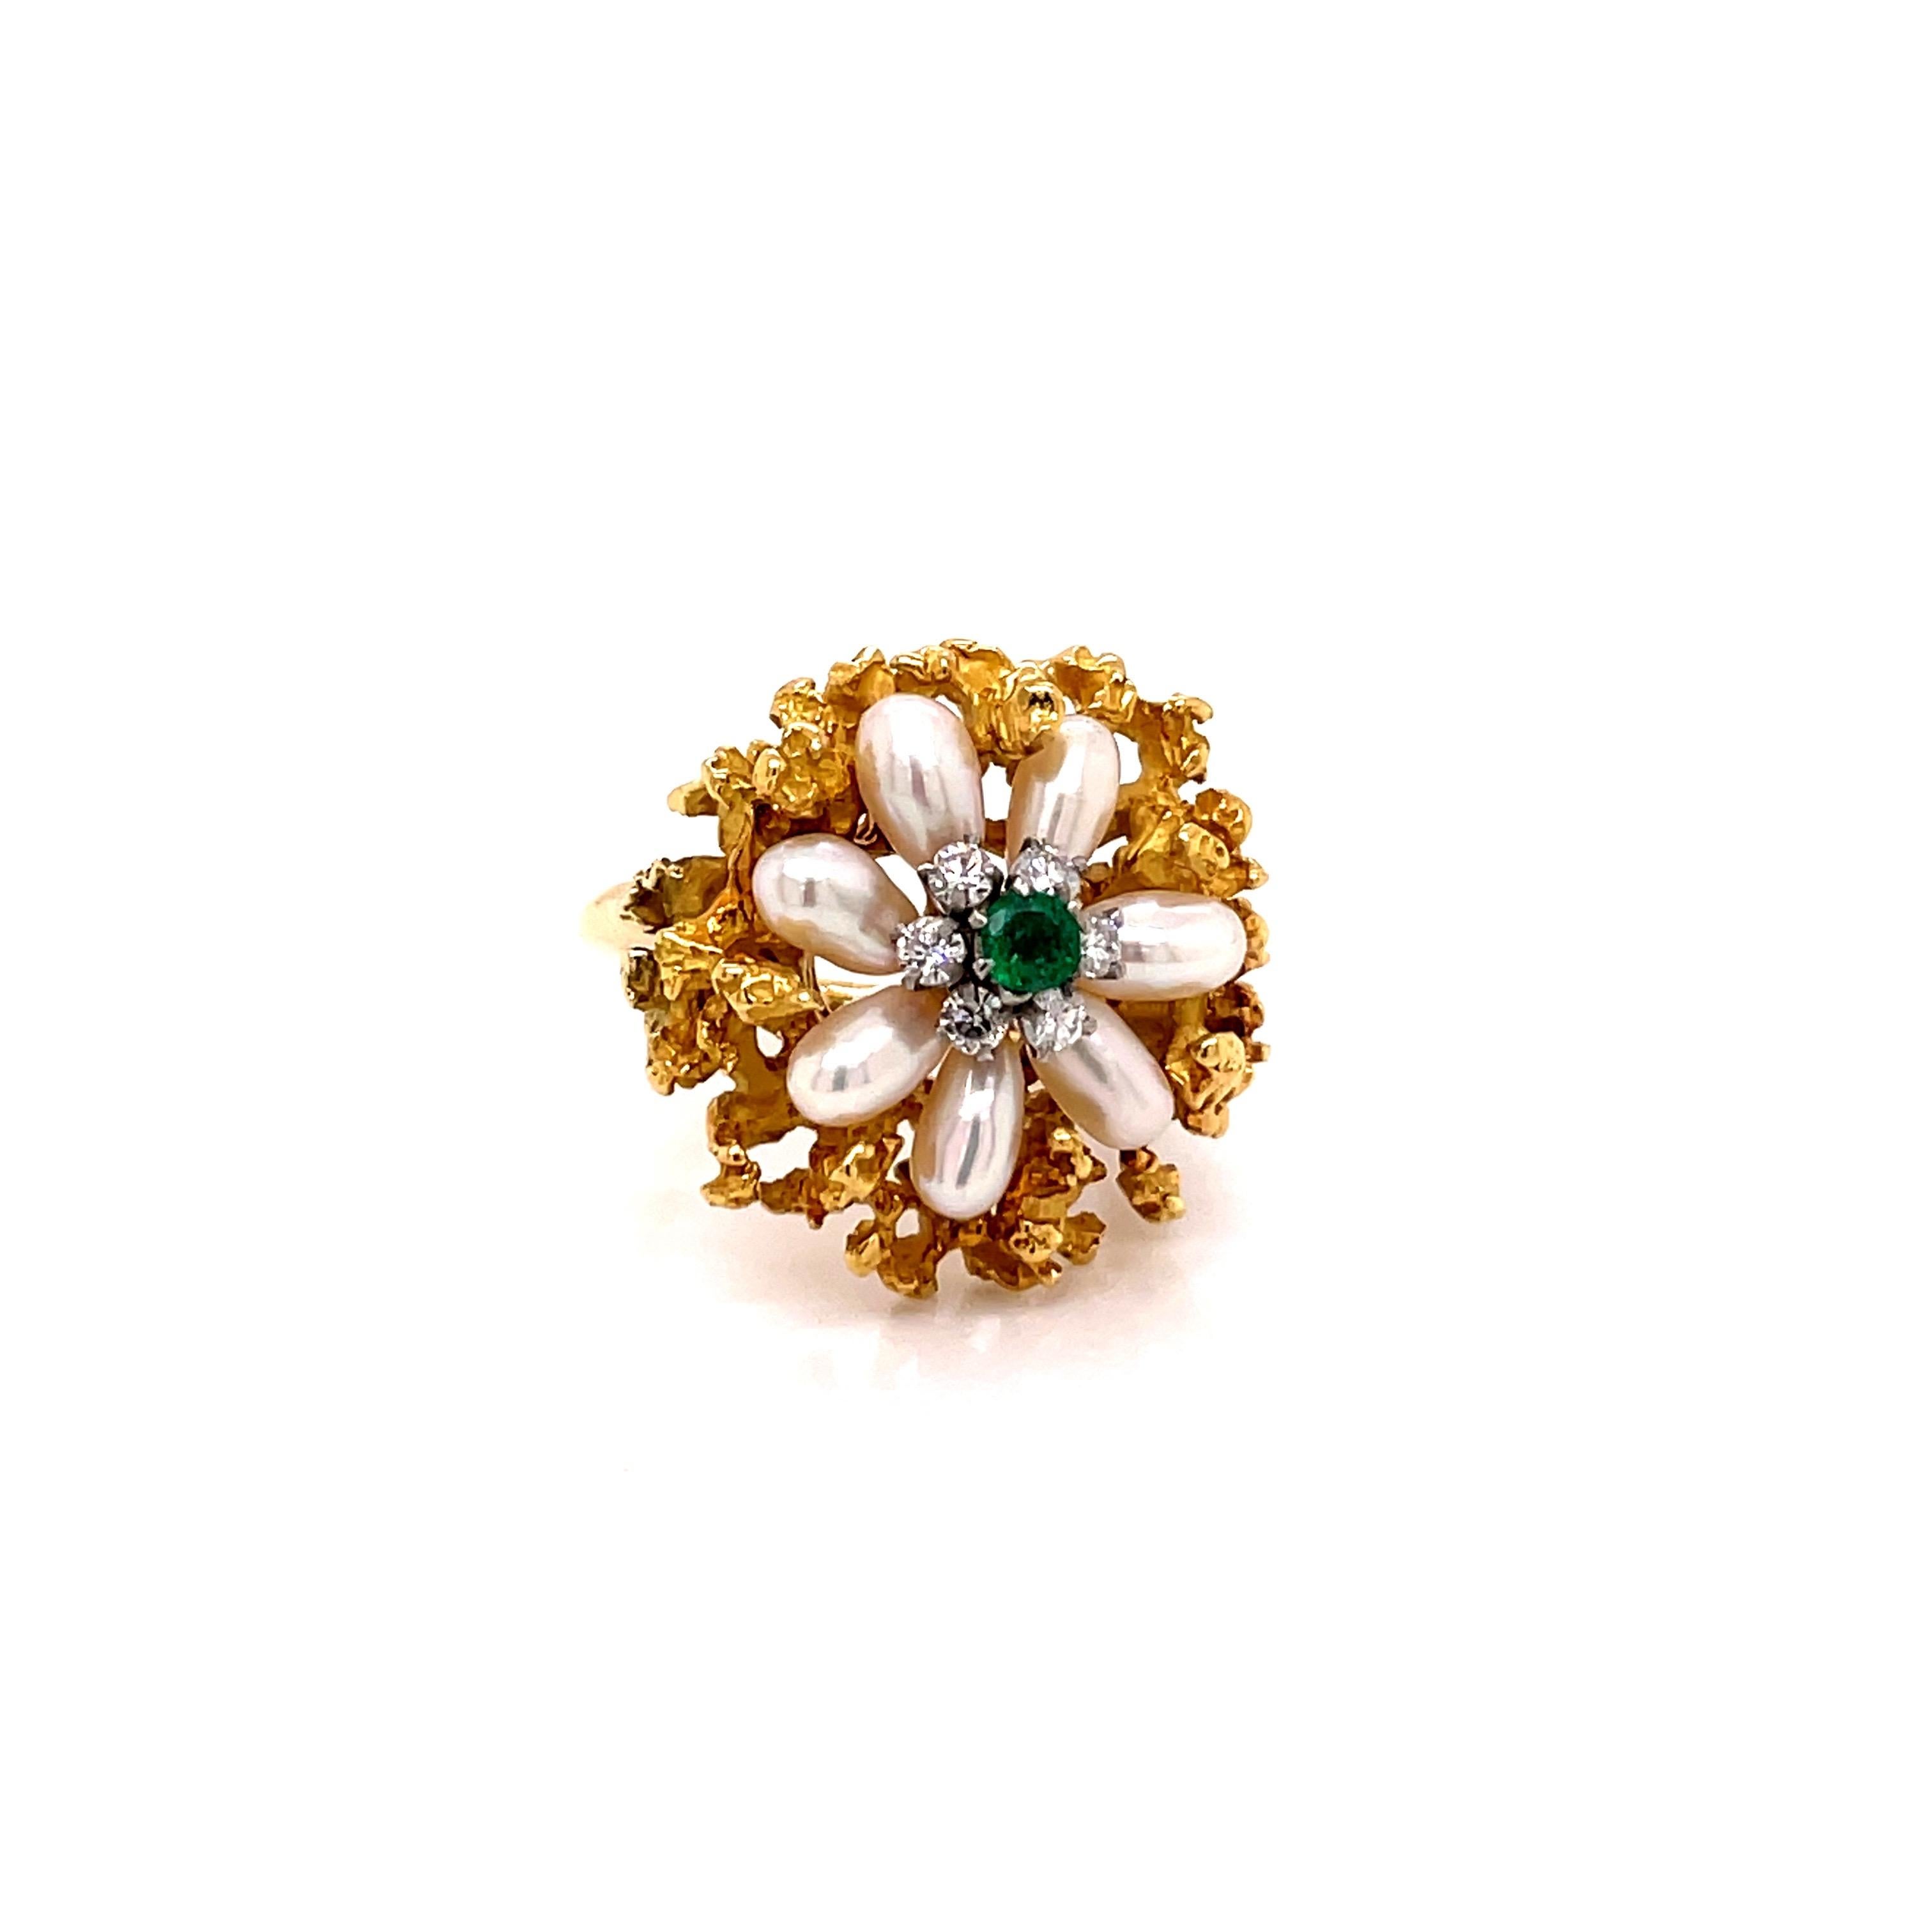 Vintage 18K Yellow Gold Emerald, Pearl and Diamond Flower Ring - The ring us set with one genuine emerald weighing about .16ct with very fine green color. The emerald is surrounded by 6 round brilliant diamonds weighing approximately .25ct with G -